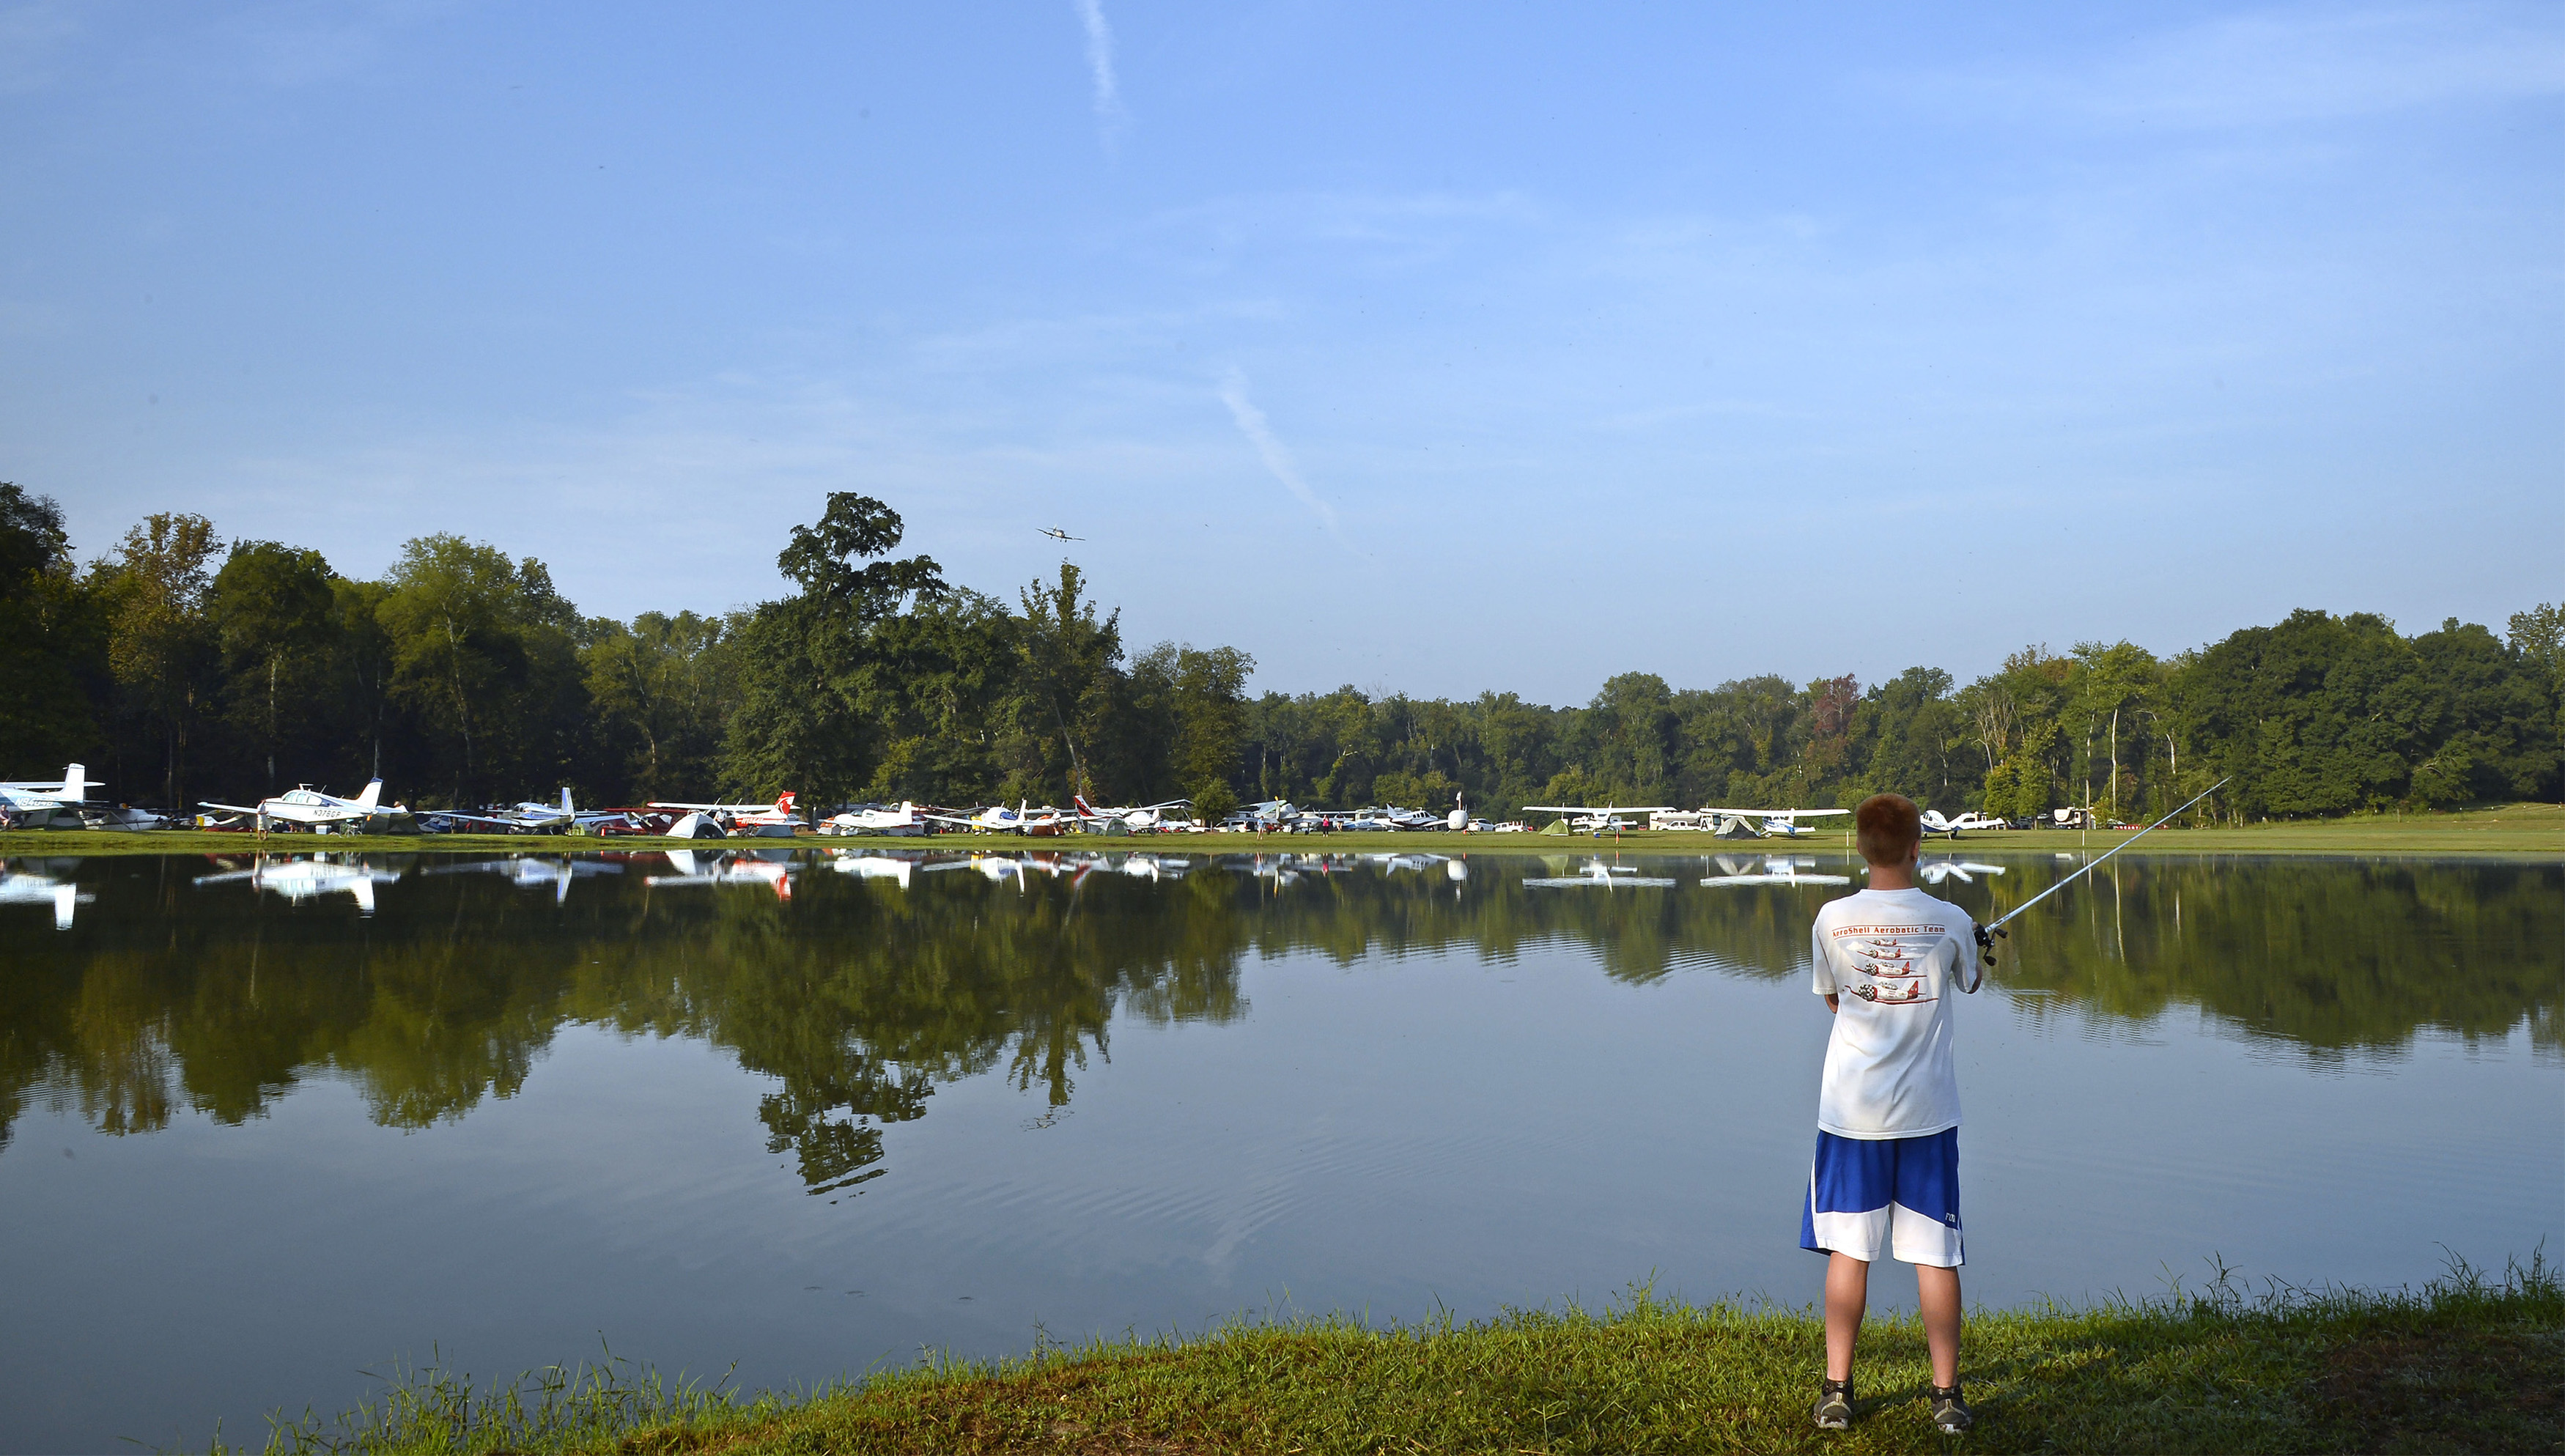 Aircraft are reflected in a pond at Triple Tree Aerodrome where Kyle Carden casts for bass during the annual fly-in. Carden and his father Keith flew from their Irvington, Alabama, home in their Stinson Voyager, an airplane that is now serving the family's fourth generation. Photo by David Tulis.